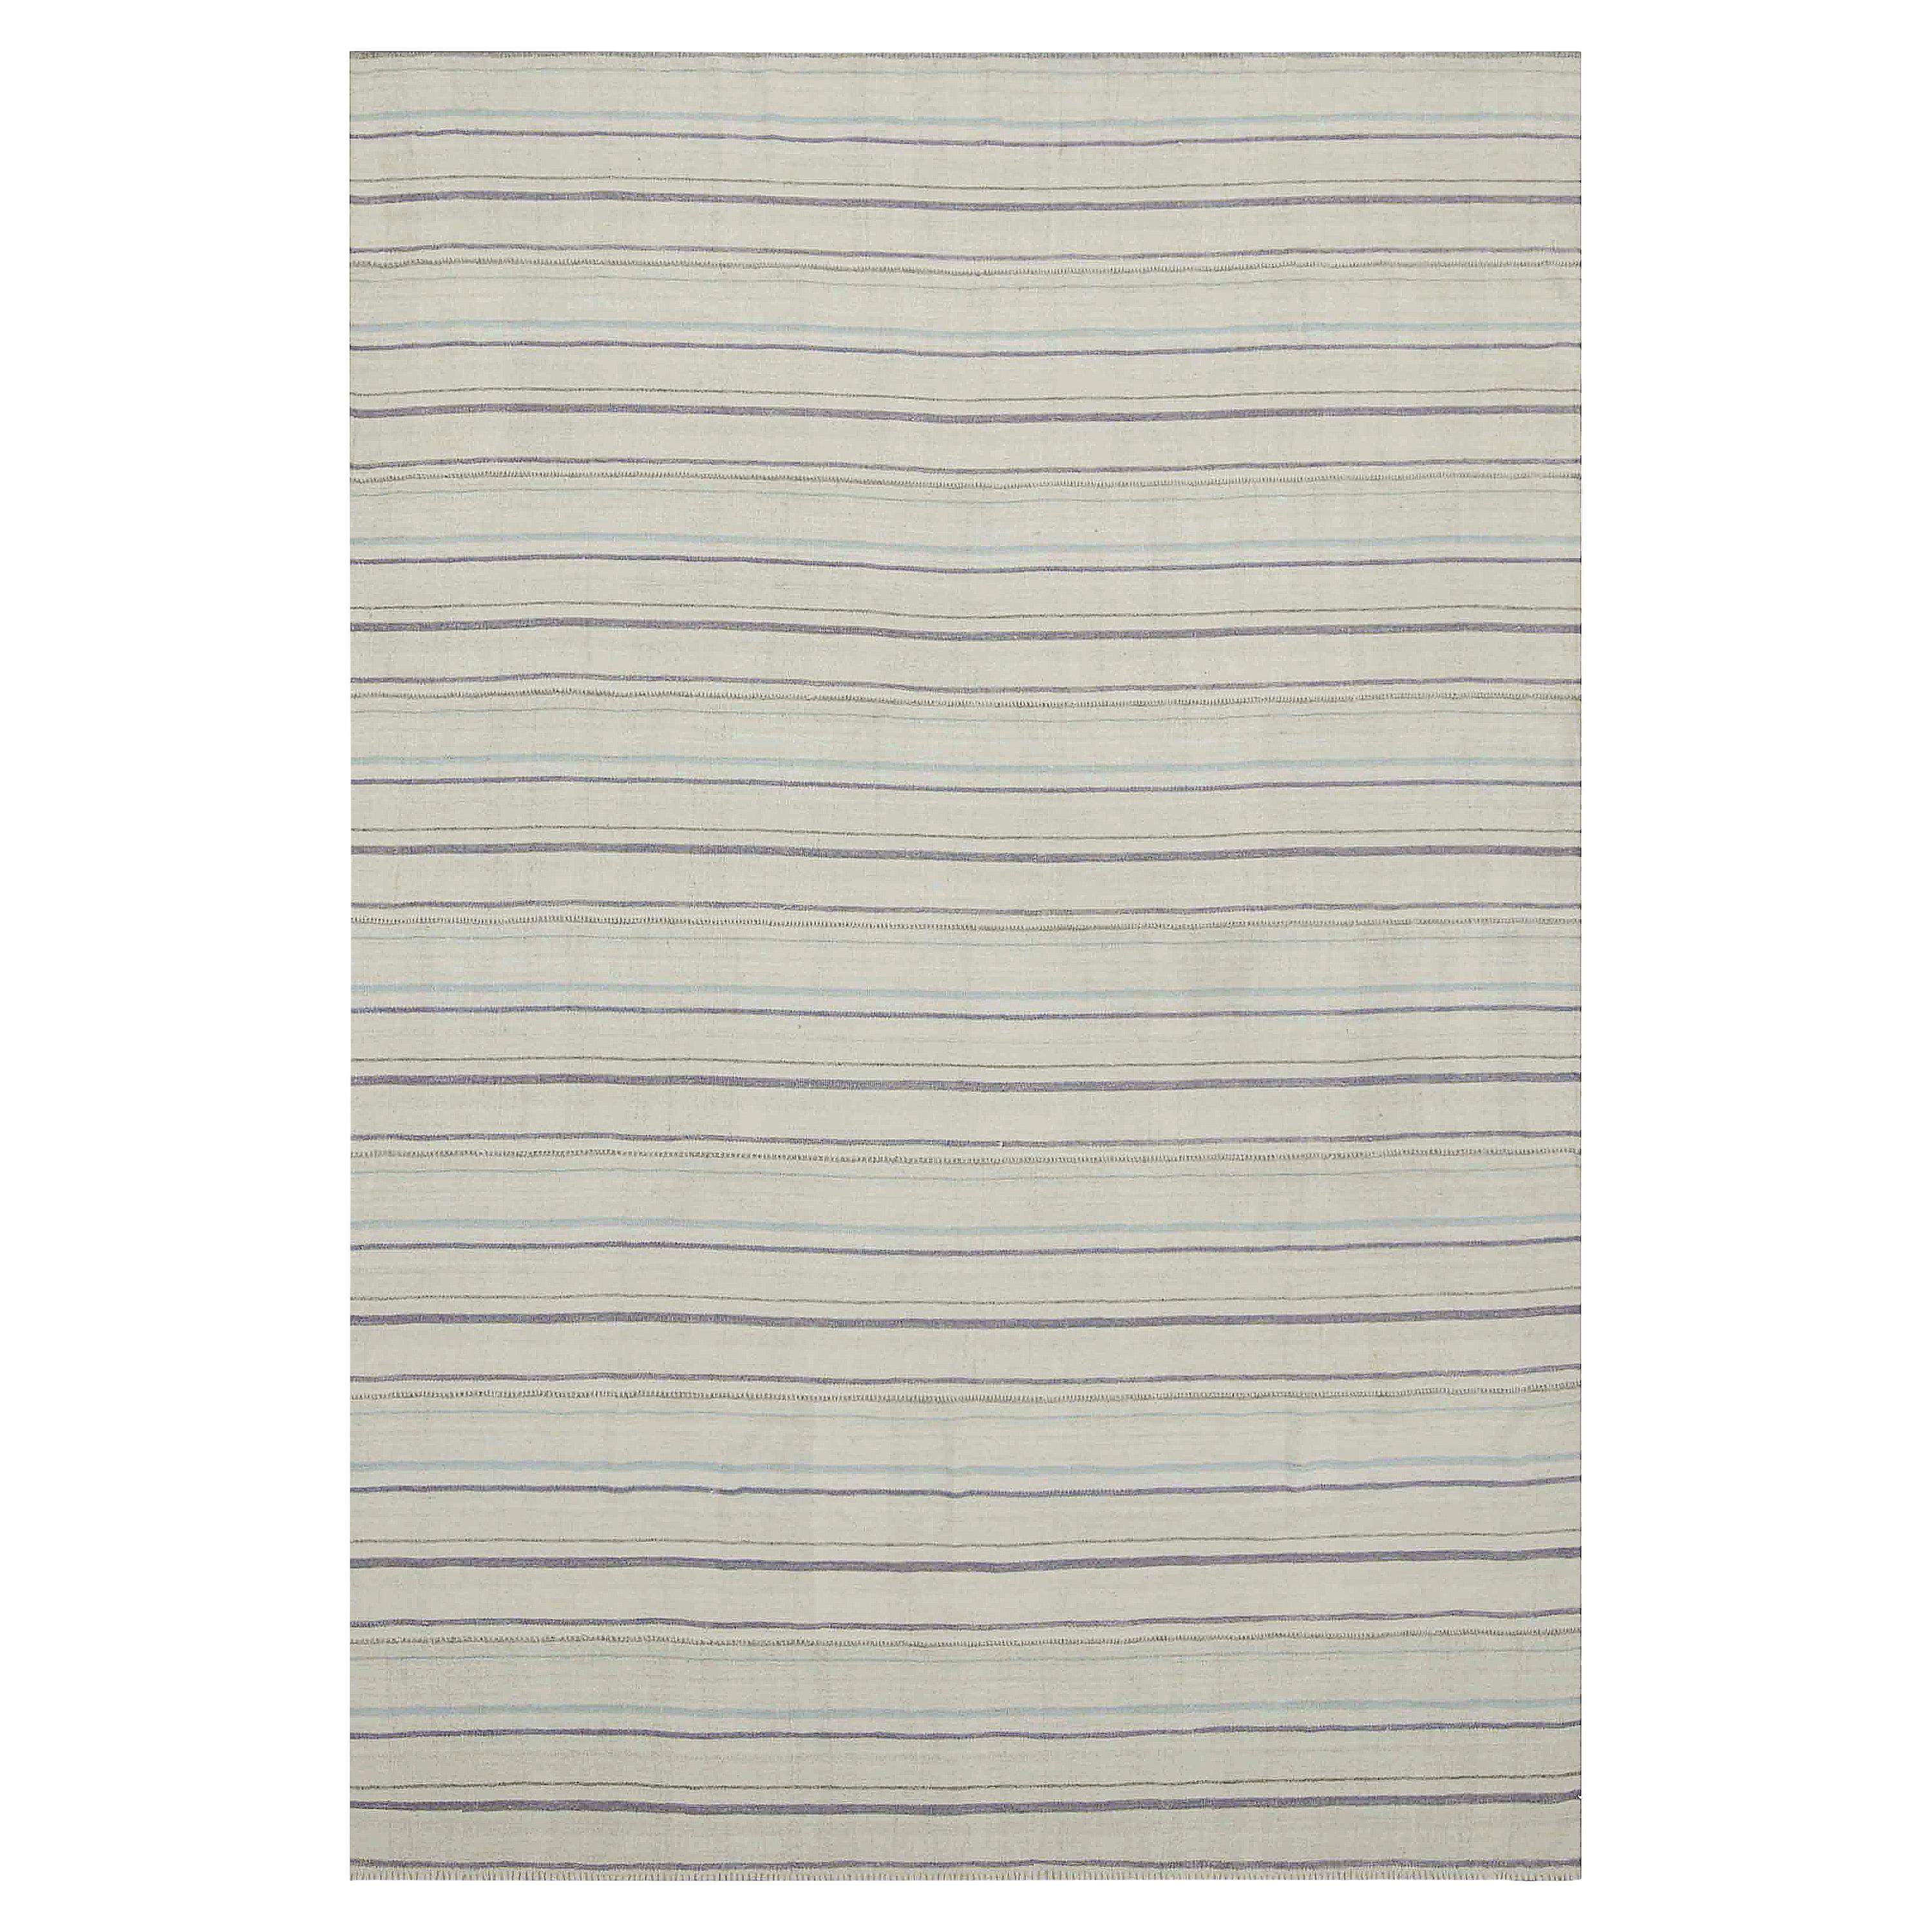 Kilim Turkish Rug in Gray and Blue Stripes on Ivory Field